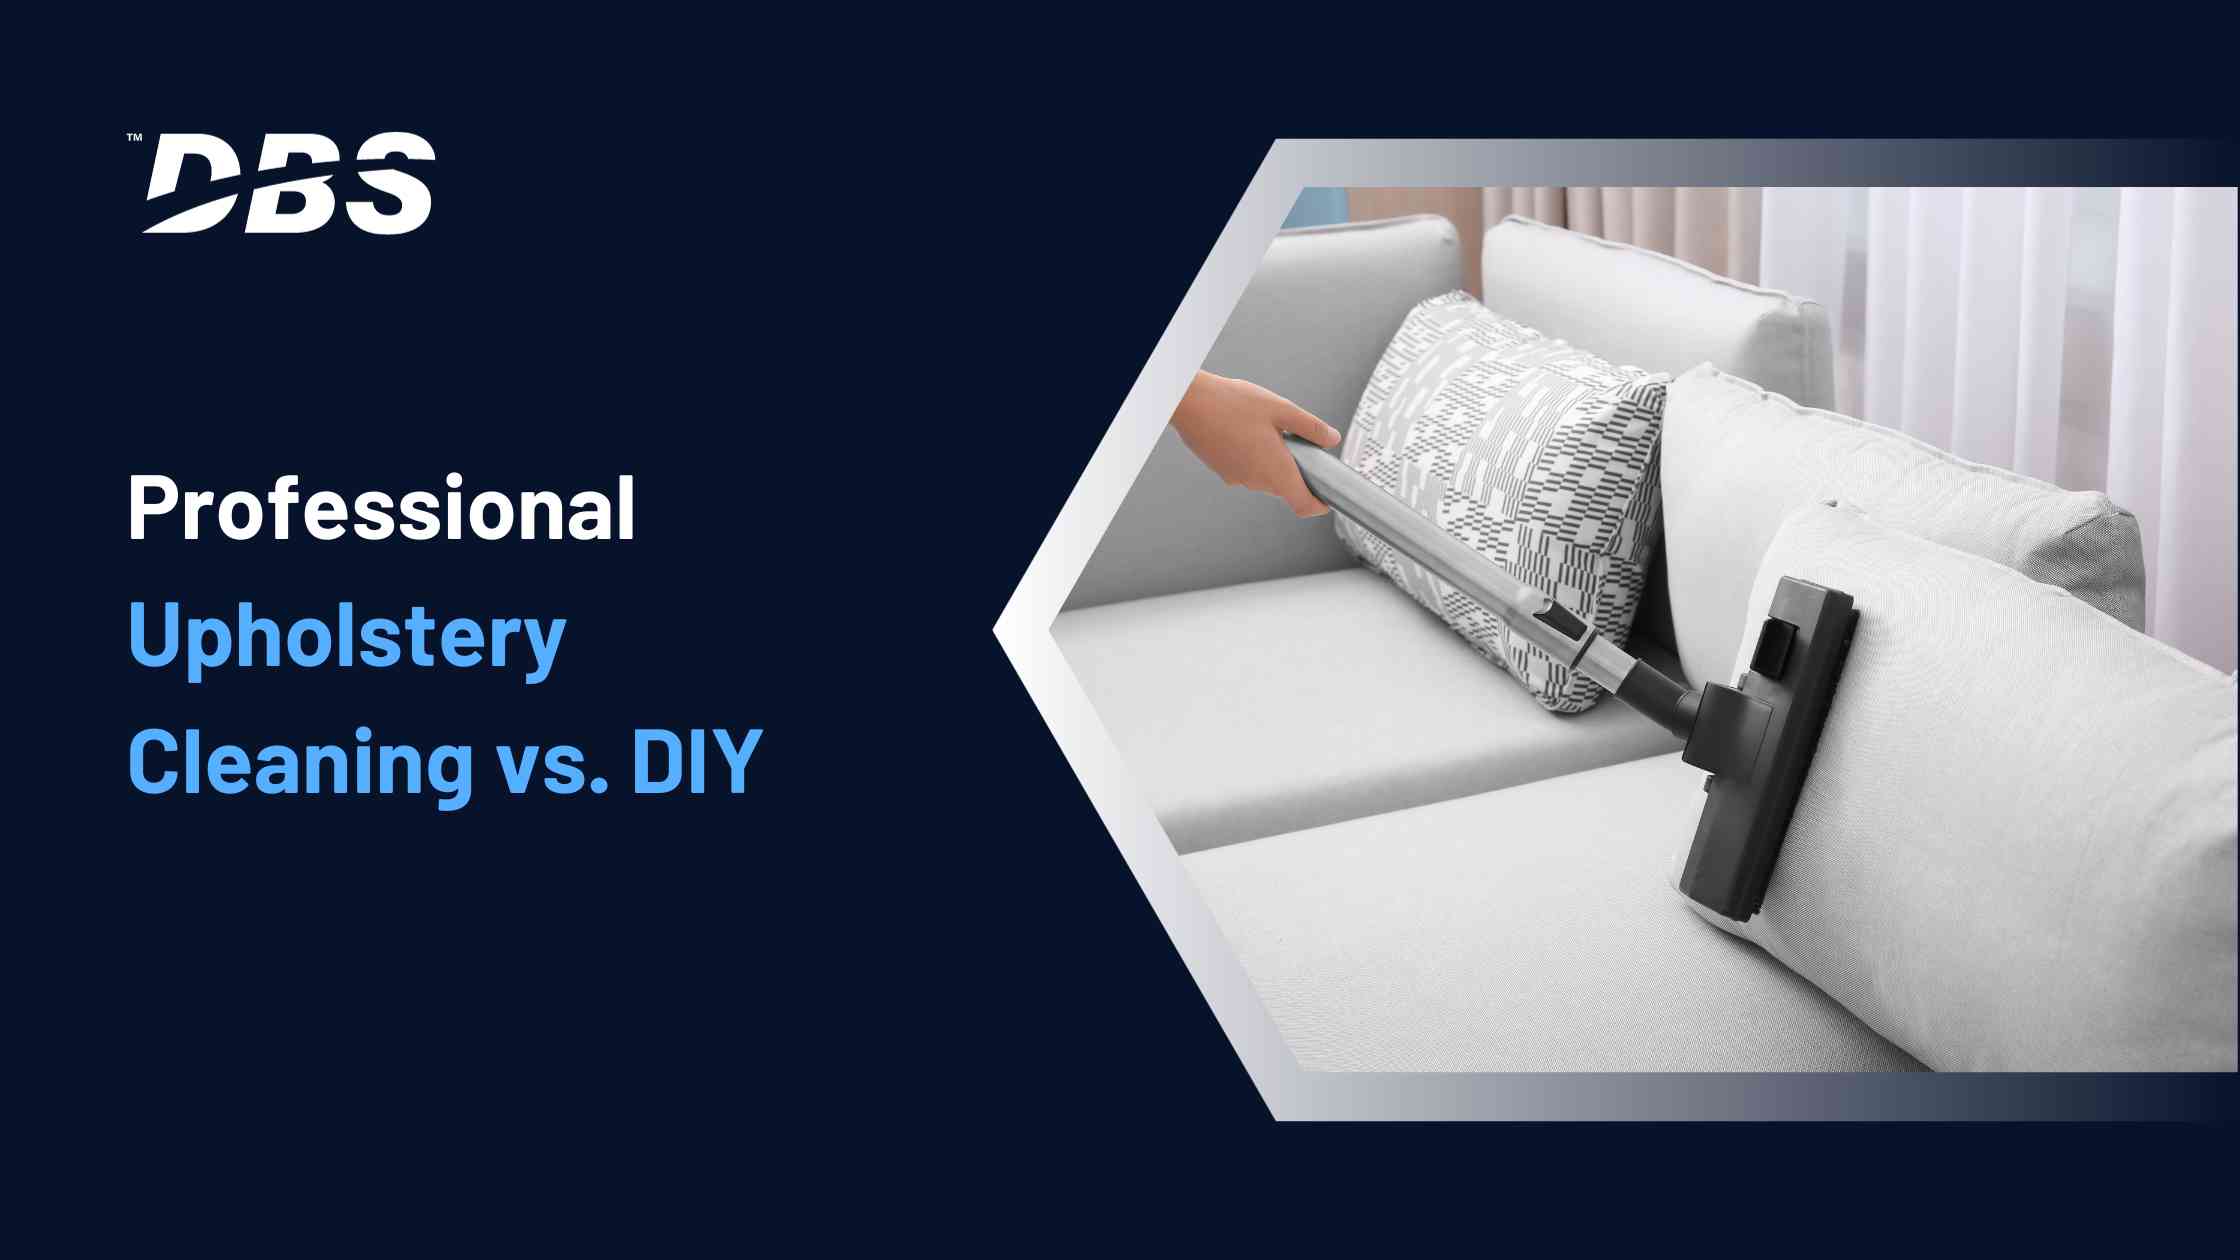 Professional Upholstery Cleaning vs. DIY